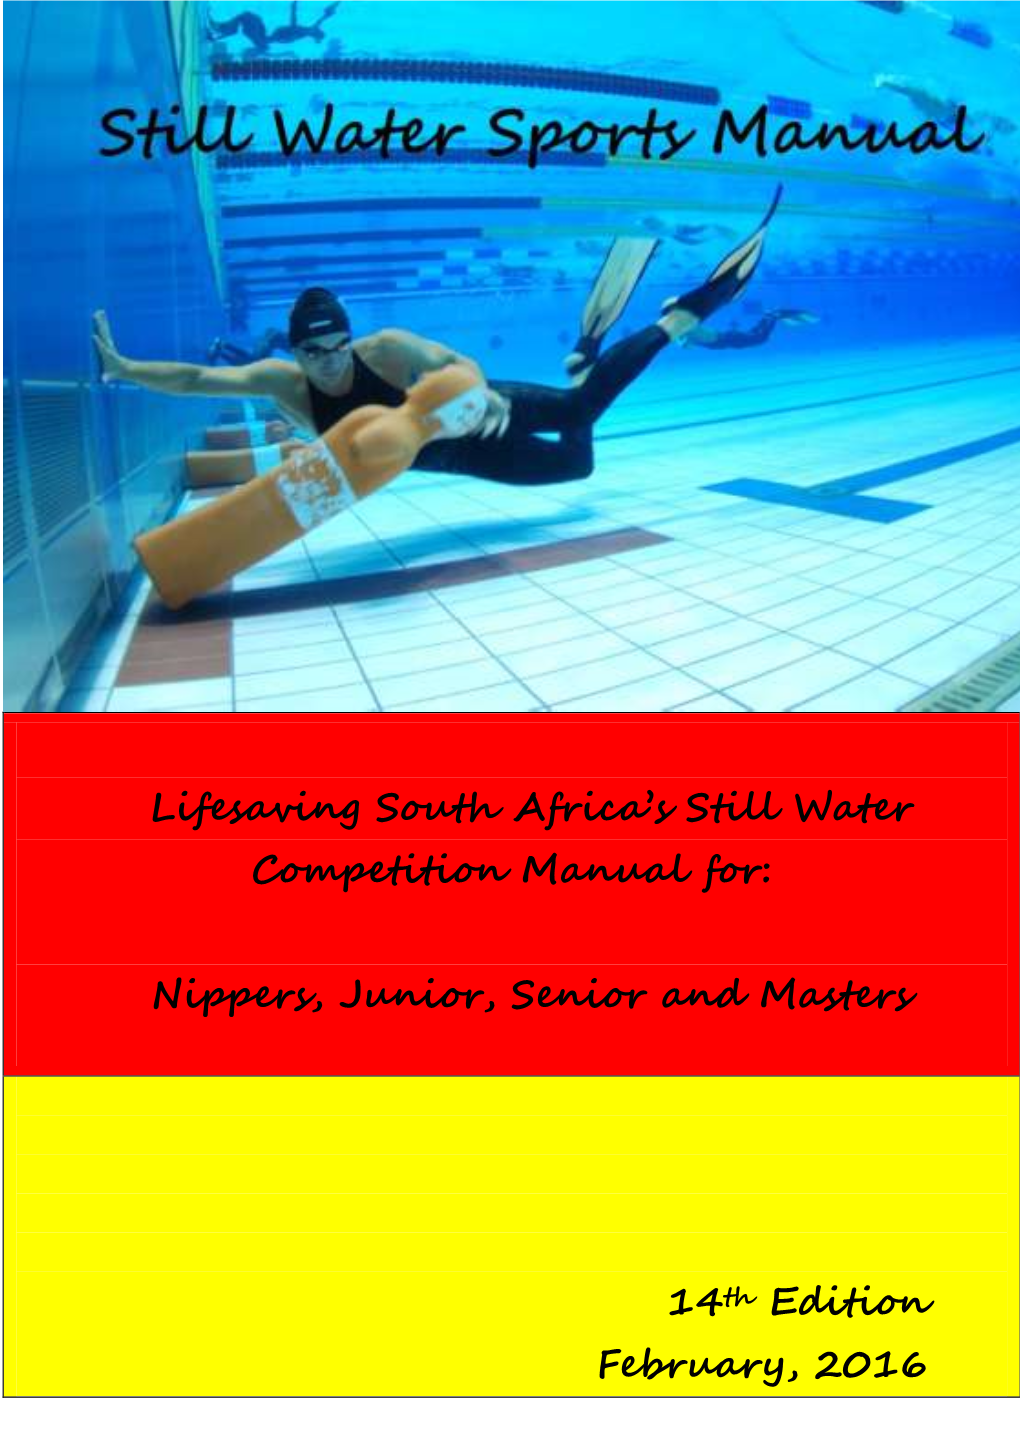 Lifesaving South Africa's Still Water Competition Manual For: Nippers, Junior, Senior and Masters 14Th Edition February, 2016